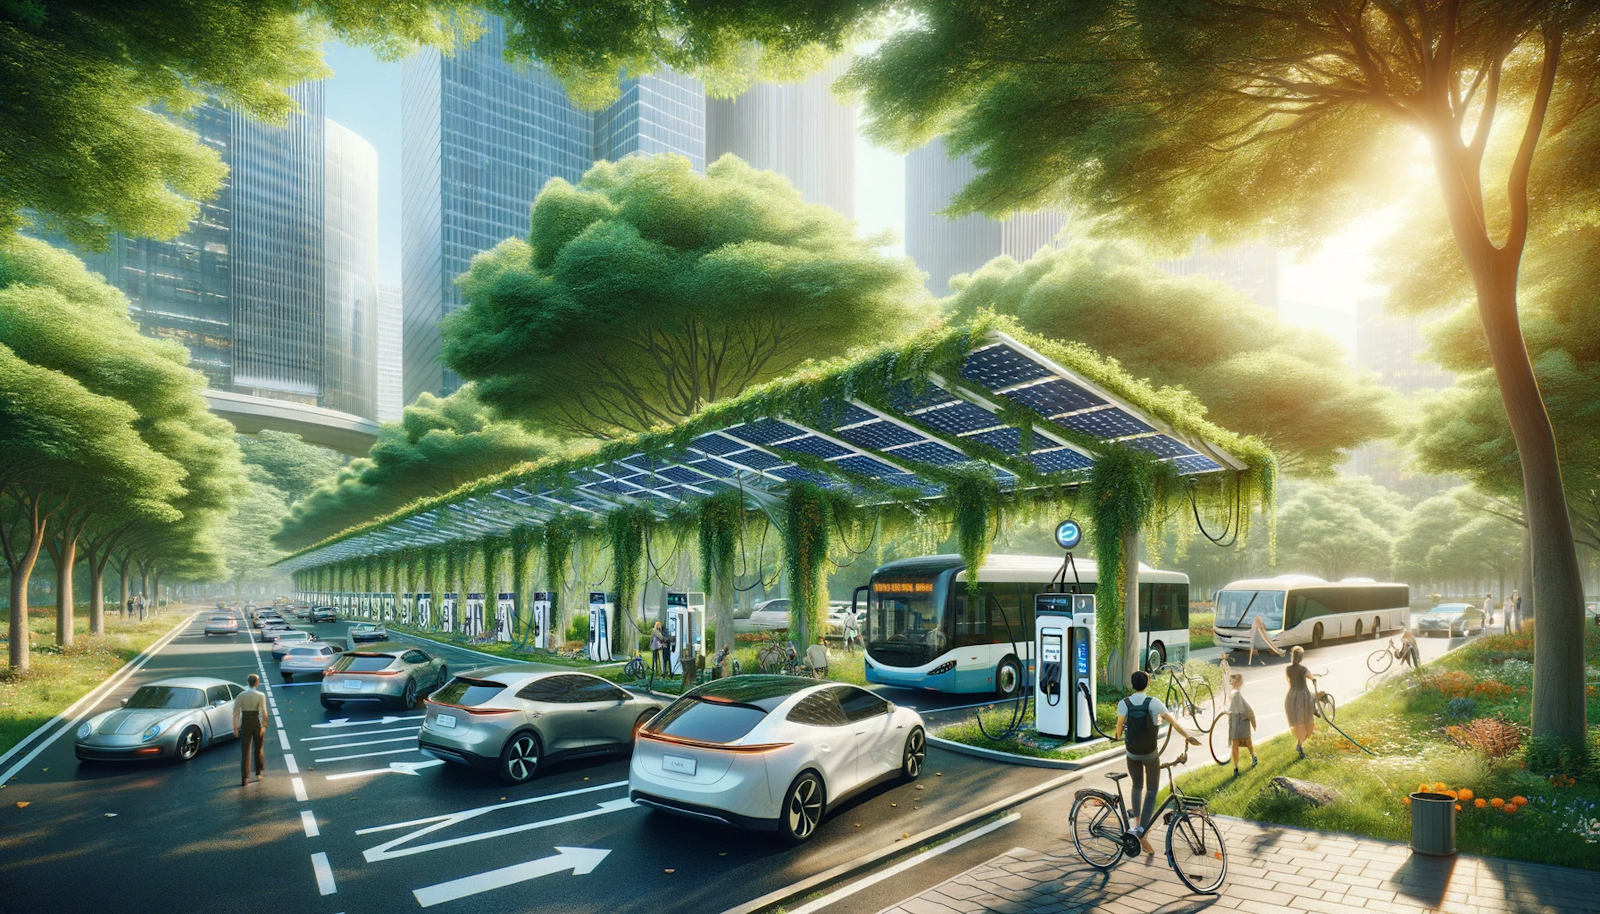 Futuristic cityscape with integrated electric vehicle charging stations among electric cars, buses, and trucks in a sustainable urban environment.